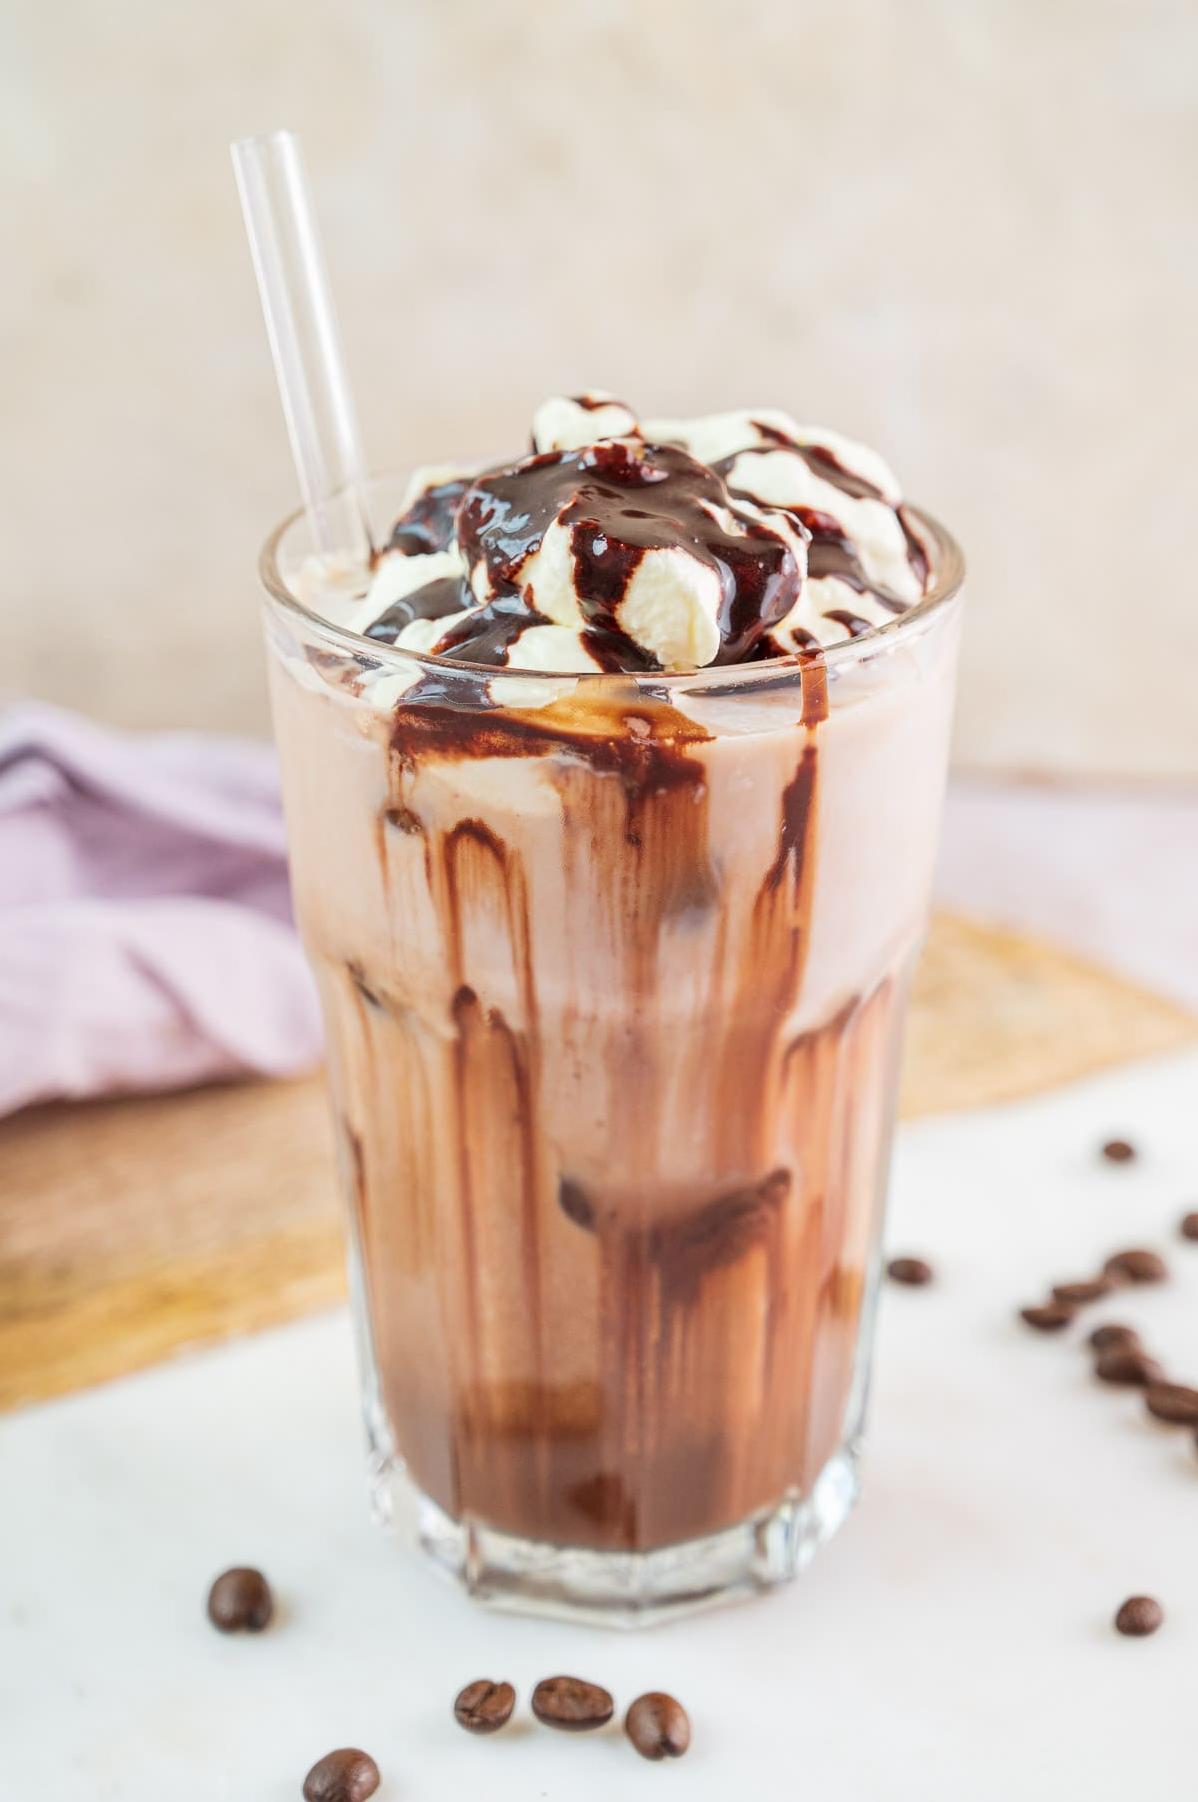  Add some indulgence to your day with a creamy and decadent mocha